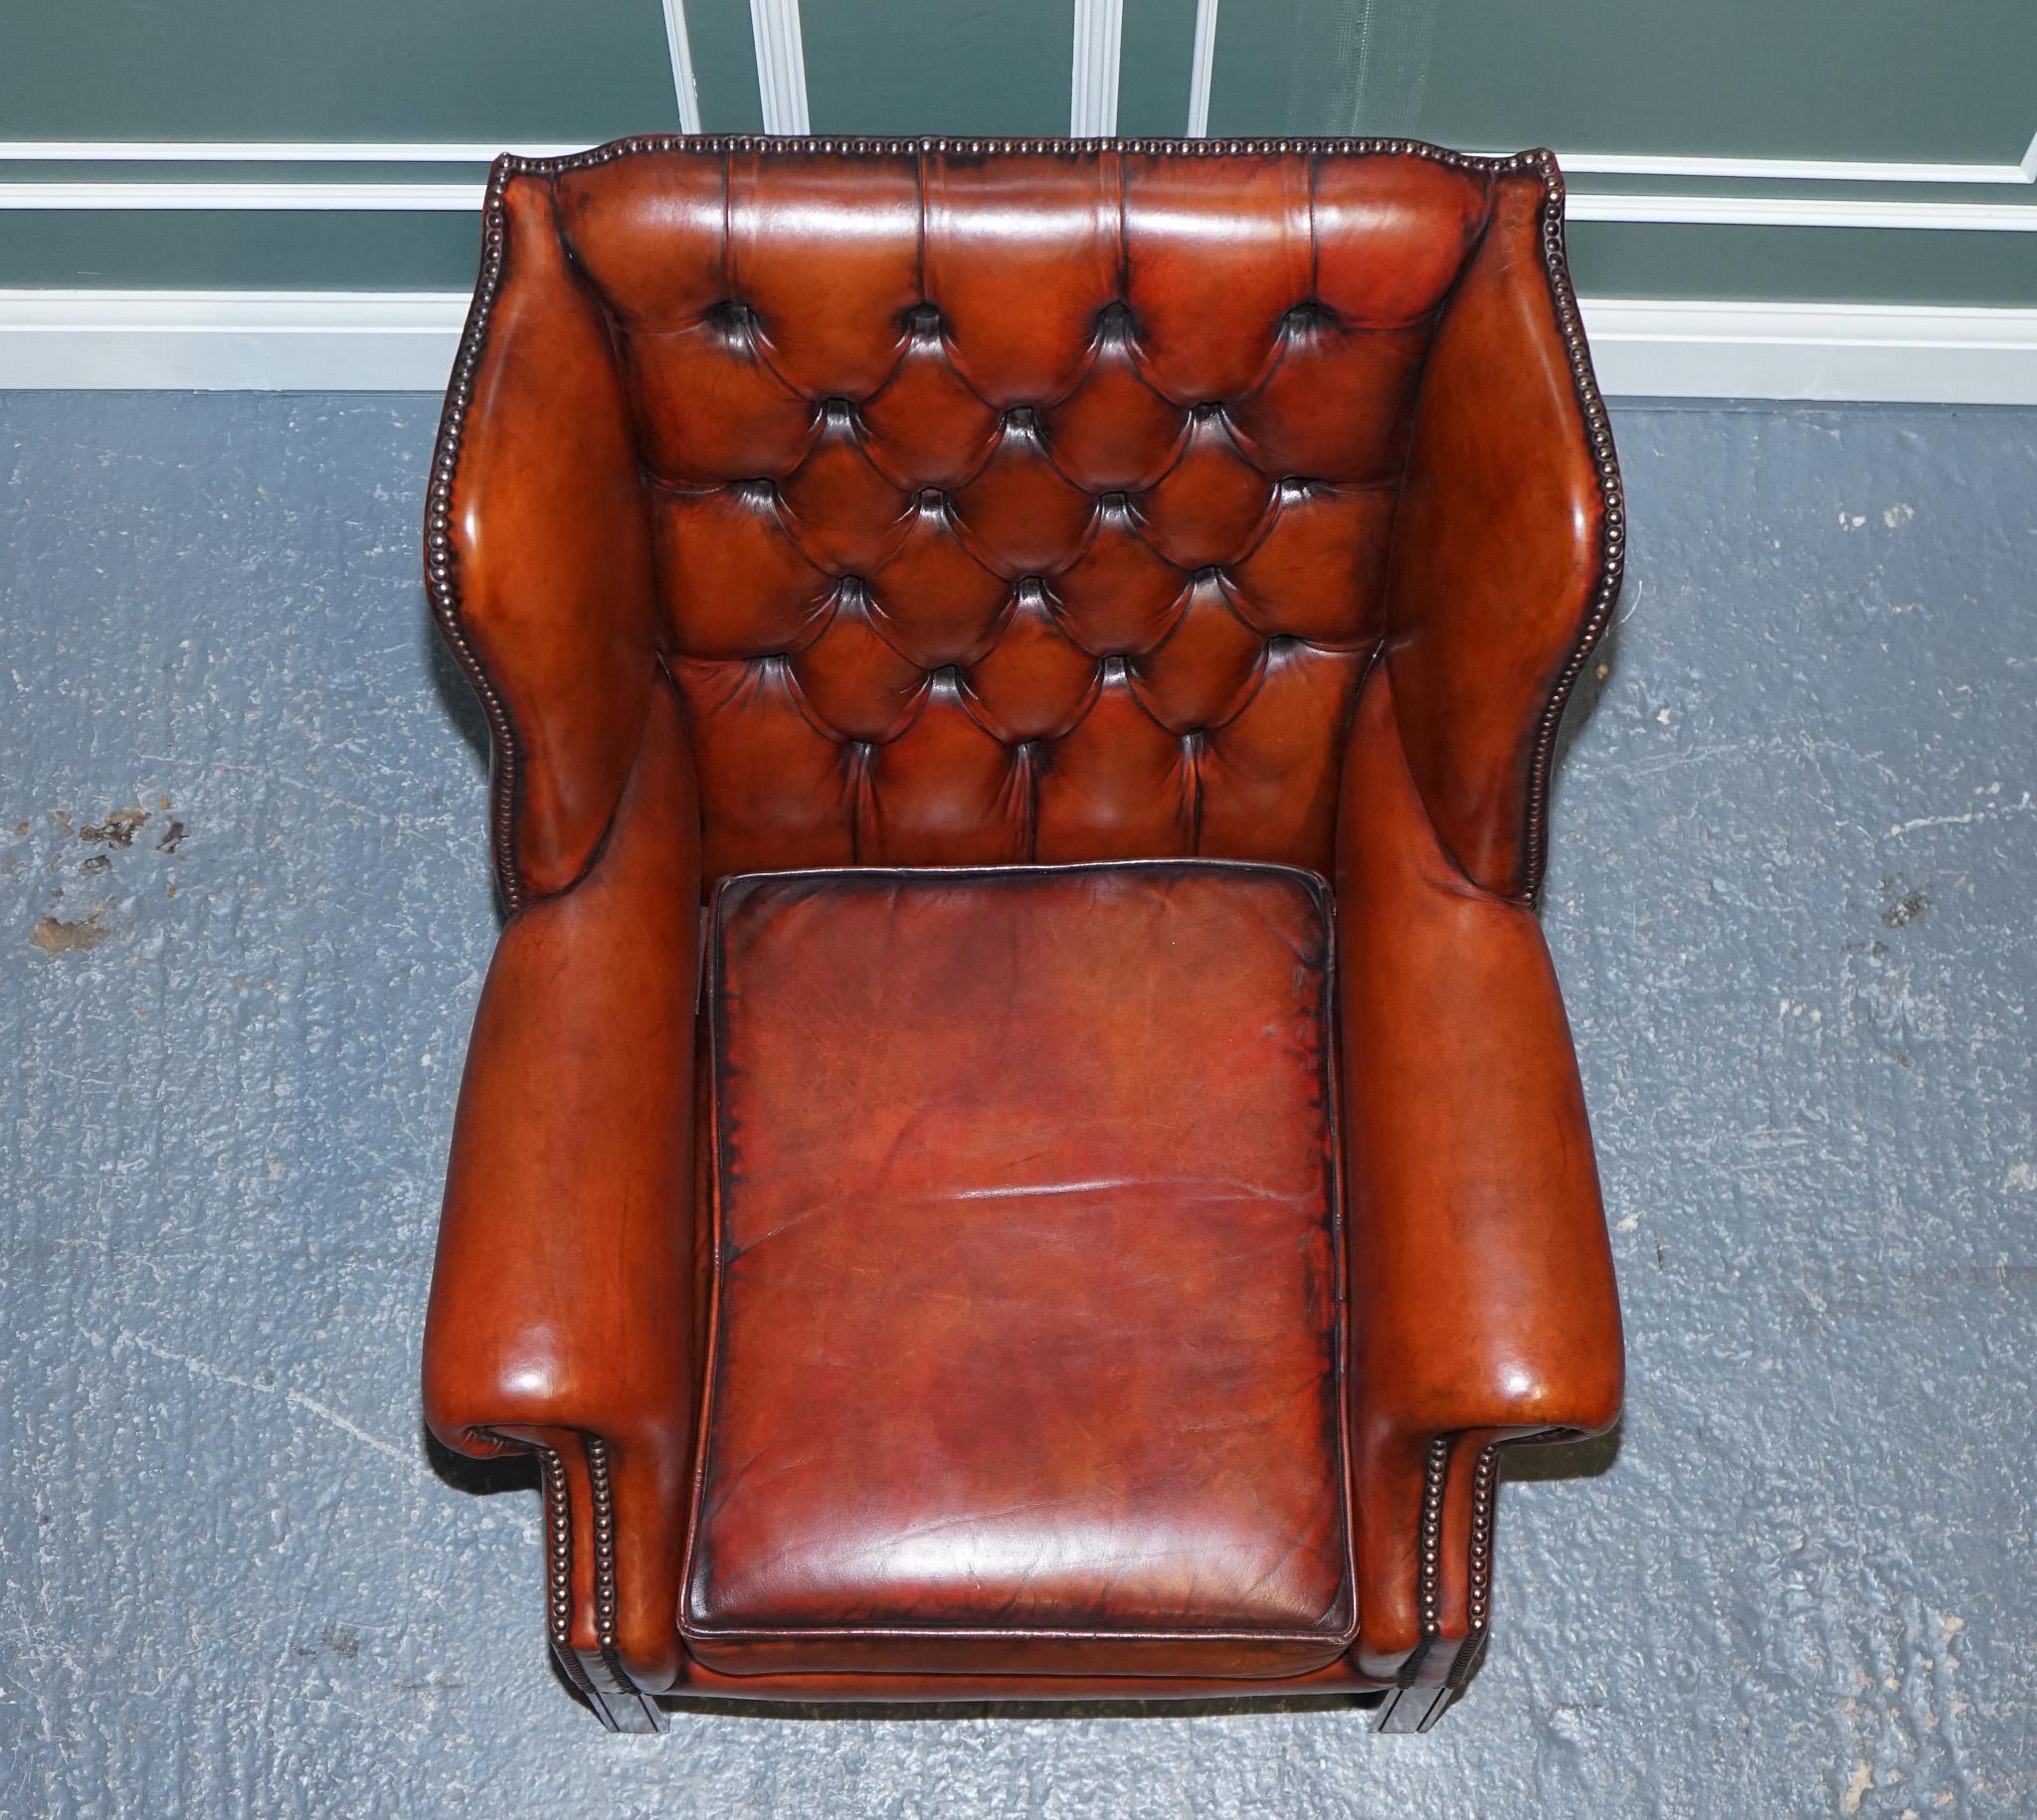 We are excited to present this stunning pair of burgundy-brown leather hand-dyed wingback chairs.

A good-looking and comfortable pair of wingback armchairs.

These are good country house chairs that look and feel every bit of the victorian